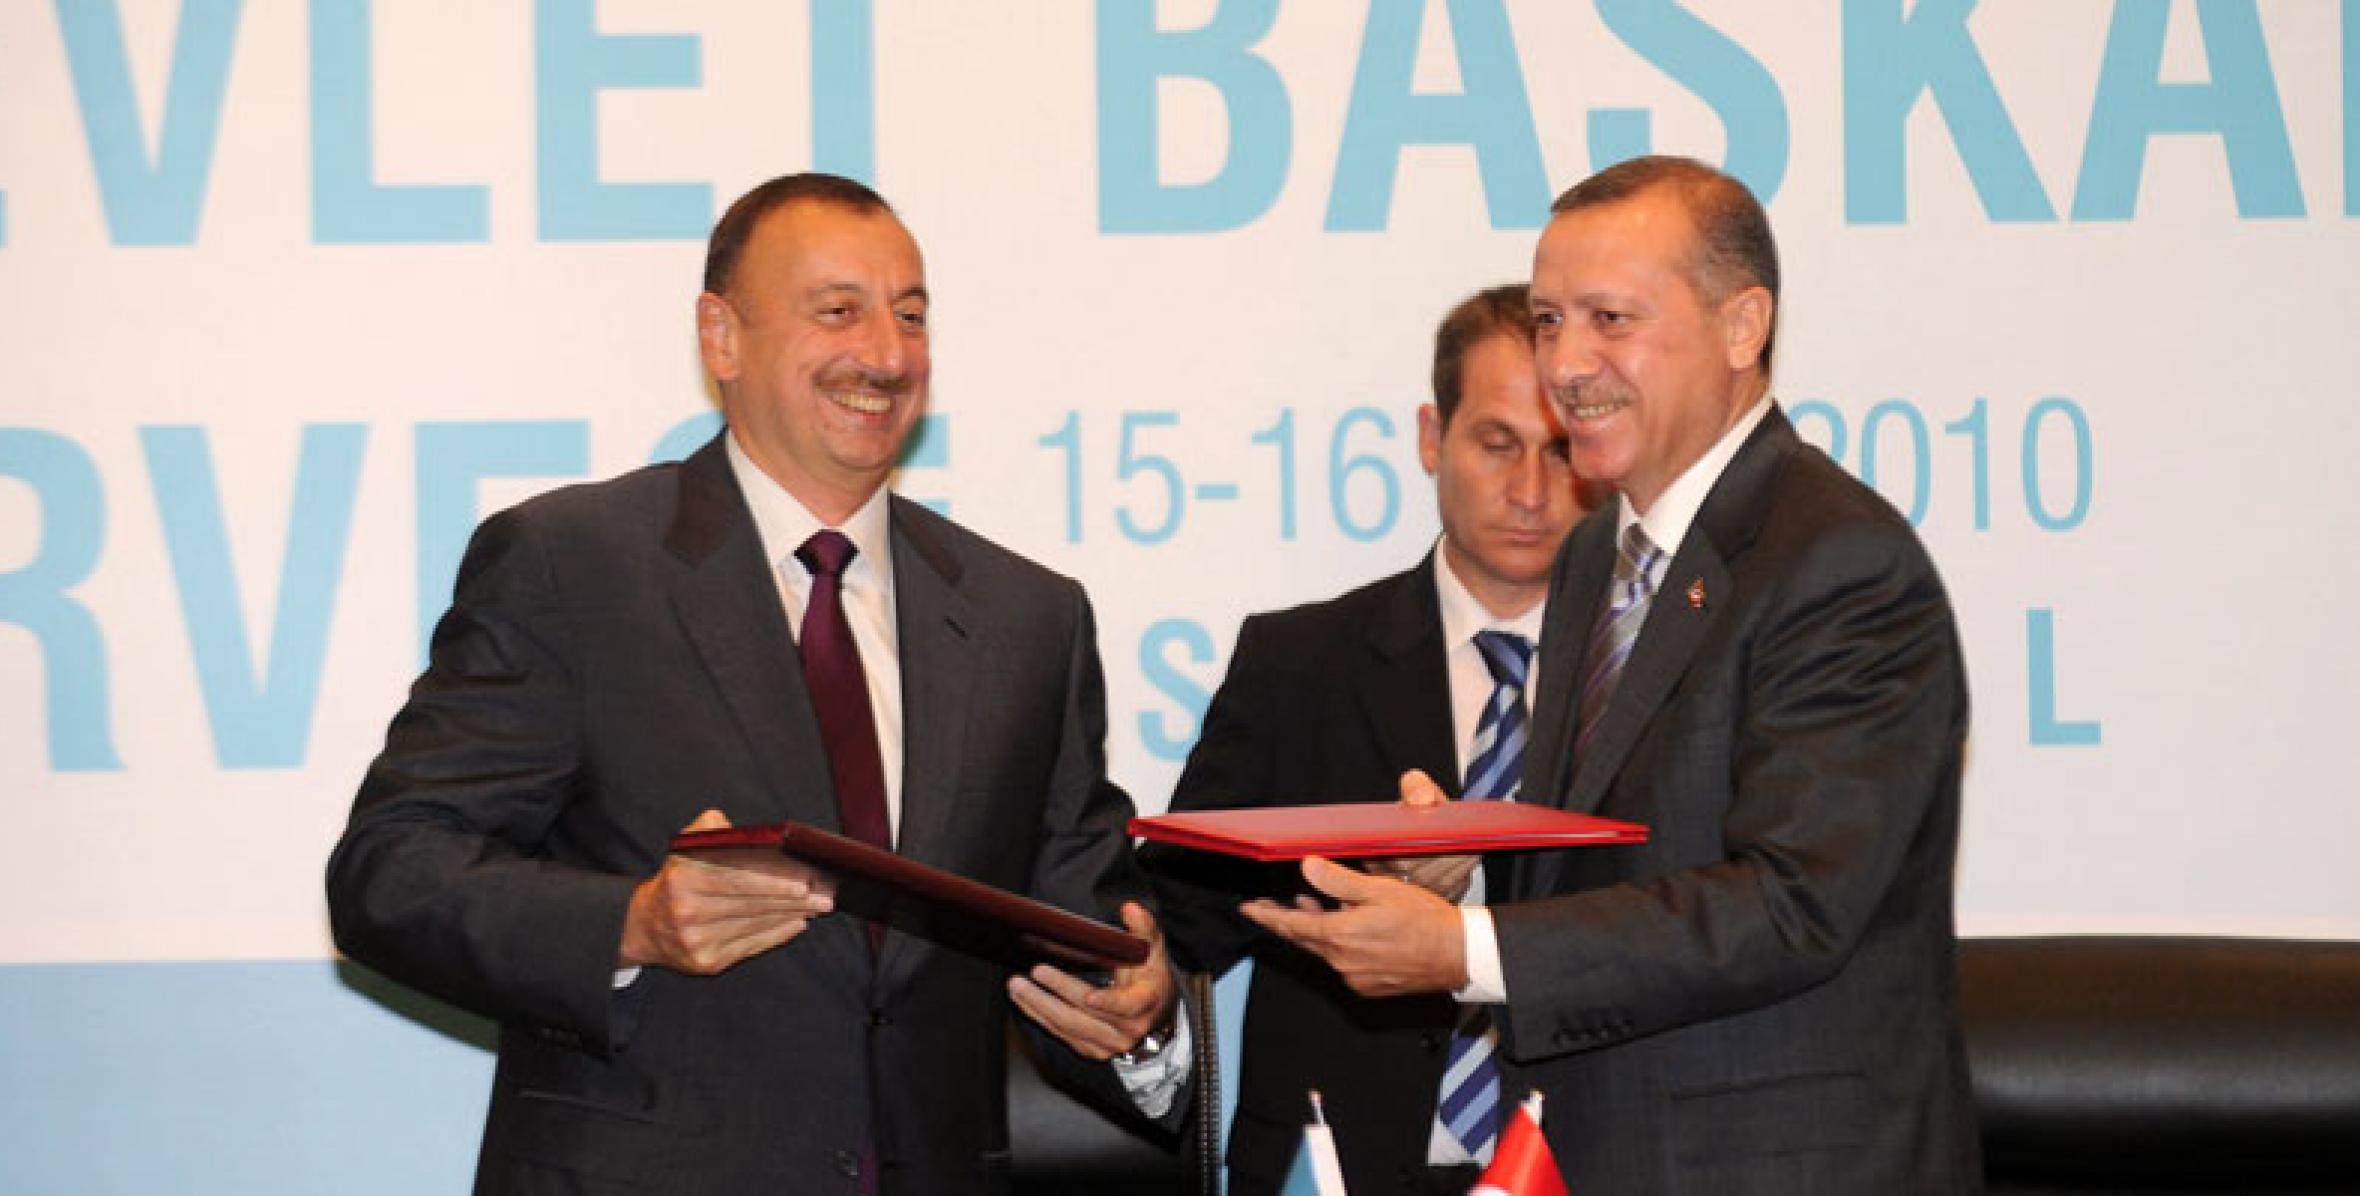 Declaration on the establishment of the Council on strategic cooperation between Azerbaijan and Turkey has been signed